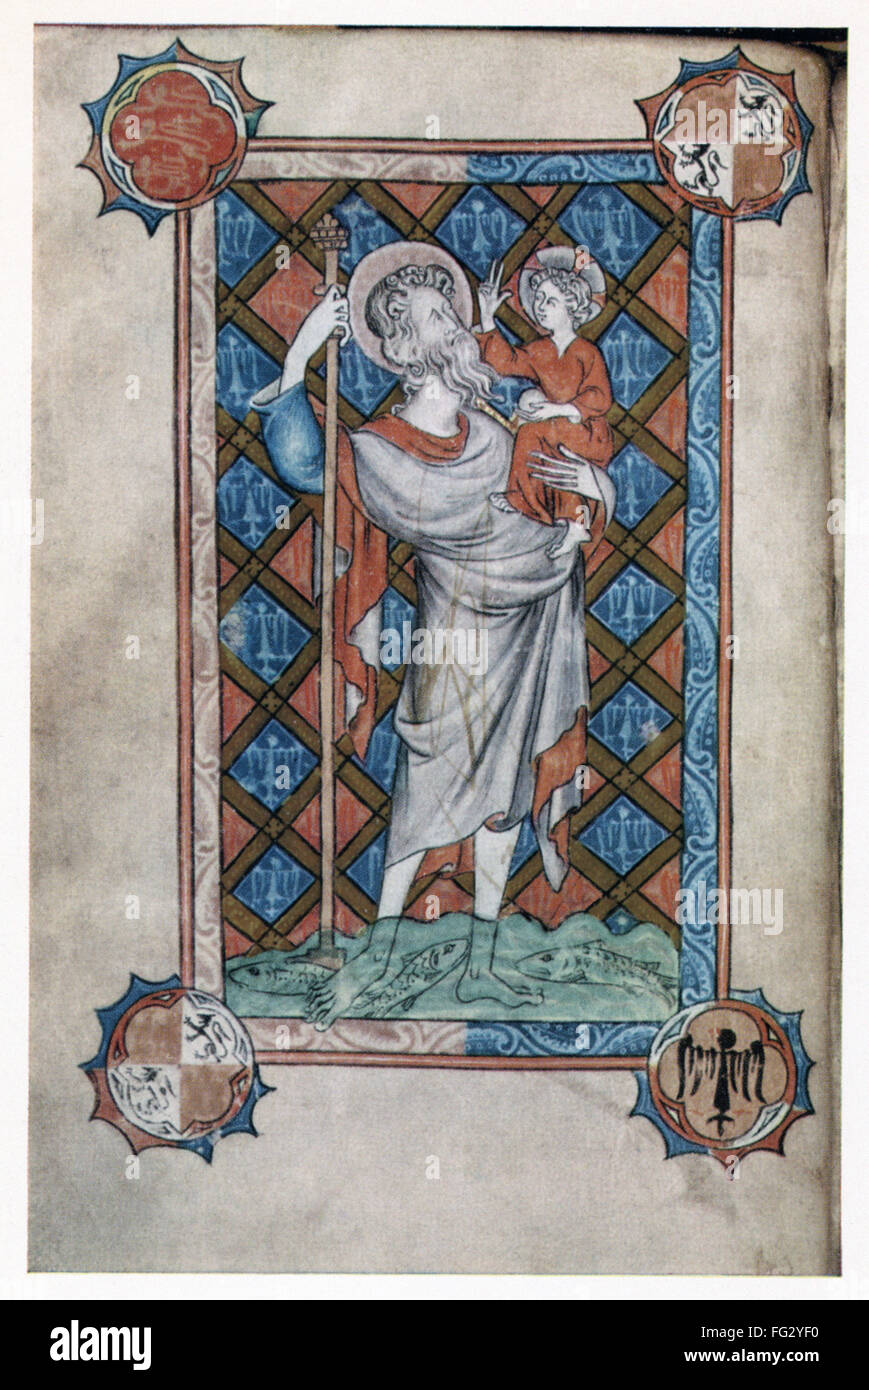 SAINT CHRISTOPHER. /nEarly Christian martyr. St. Christopher and the Christ child. Illumination from a Book of Hours, English, c1325. Stock Photo